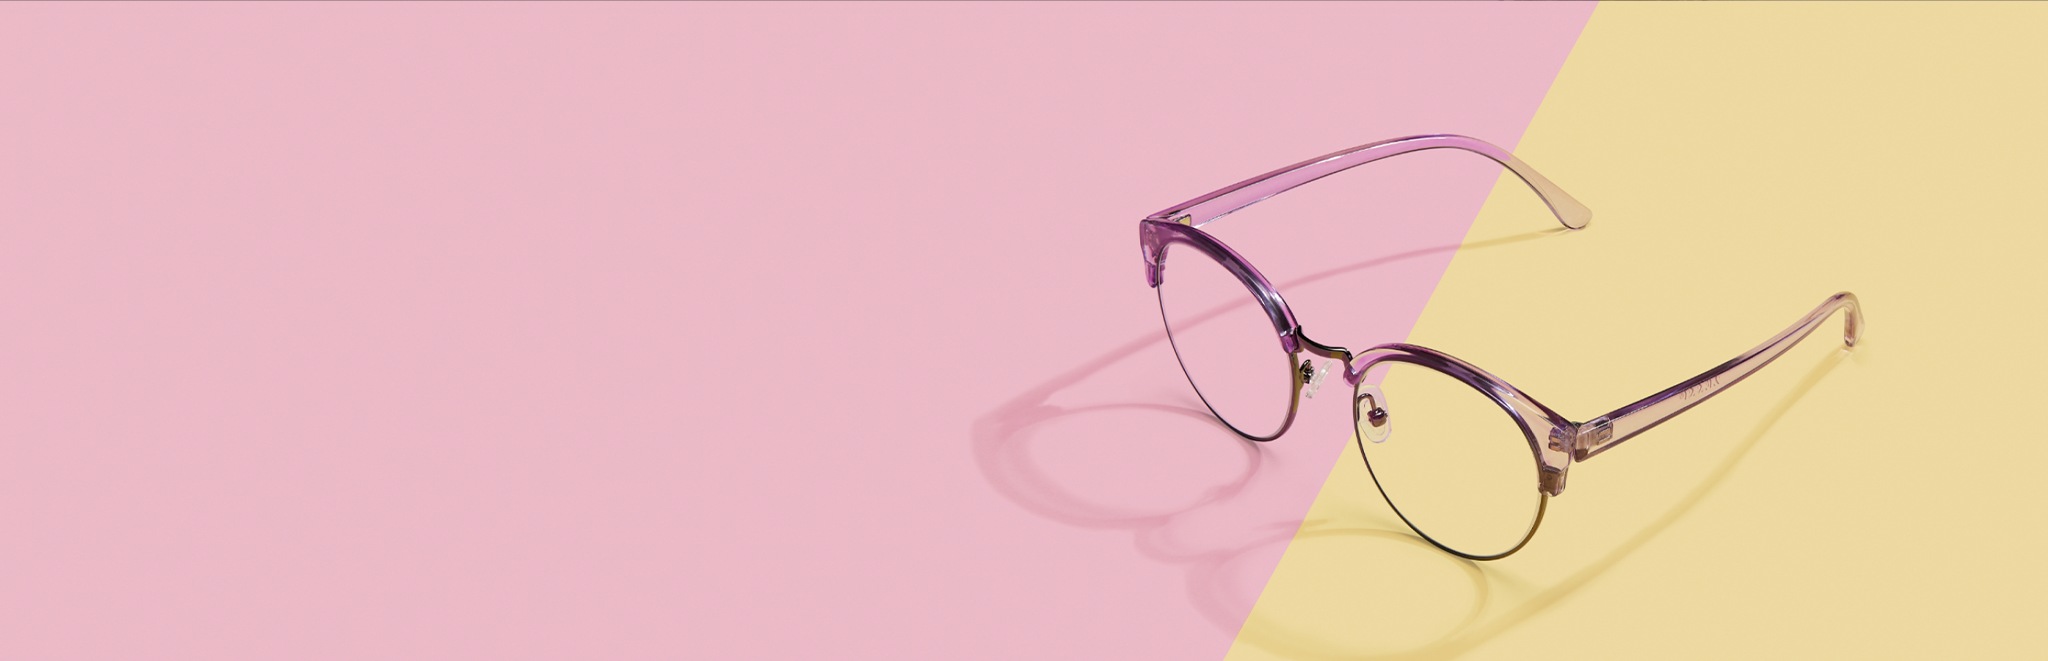 Translucent pink browline glasses with a pink and yellow background.